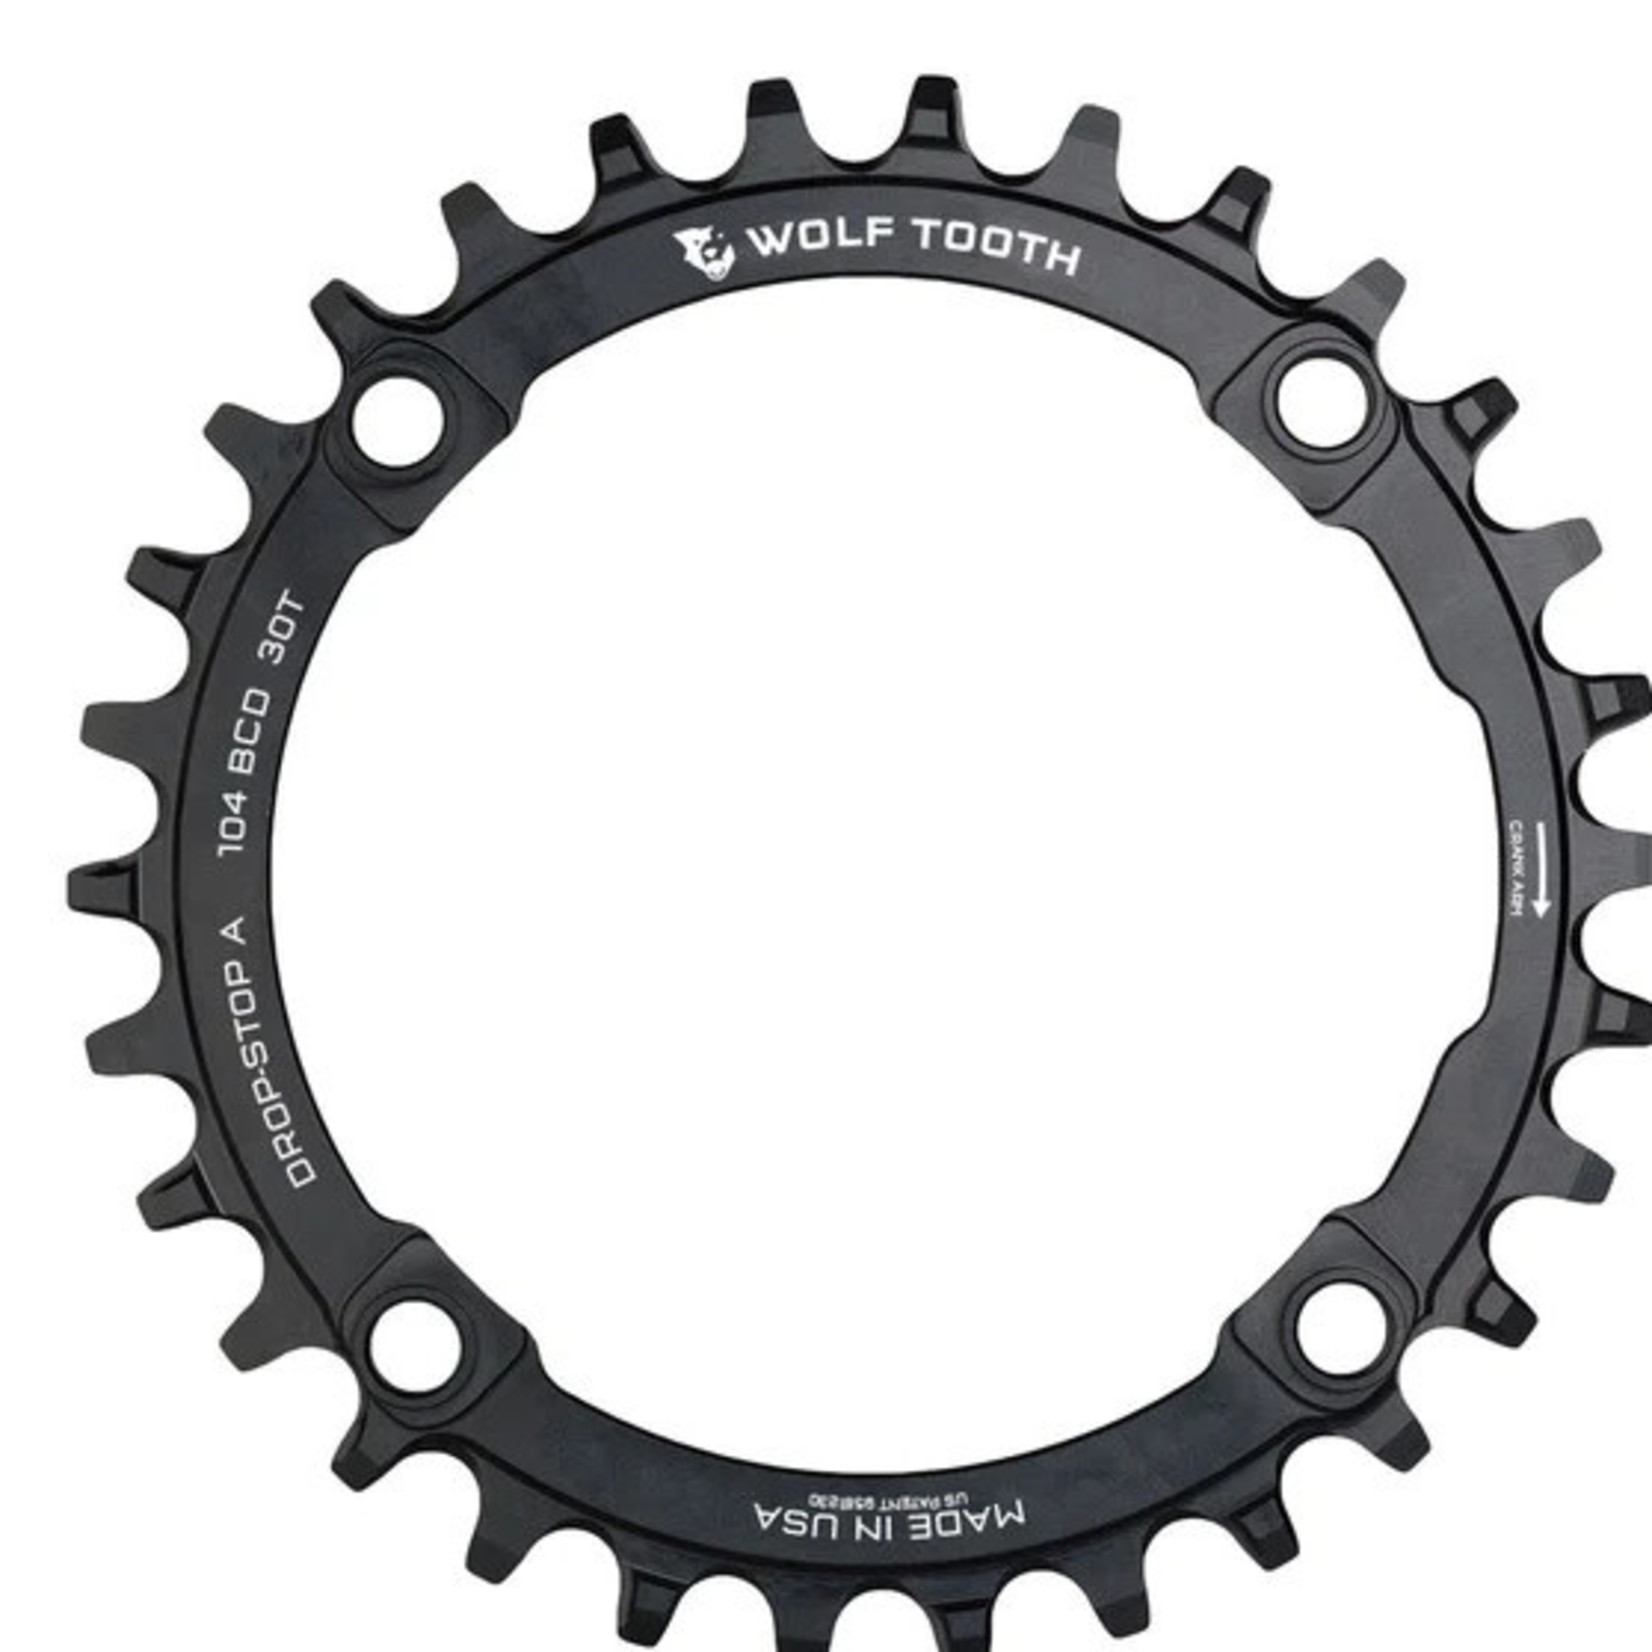 Wolf Tooth Components Wolf Tooth 104 BCD Chainring 104 BCD 4-Bolt Drop-Stop Black 30t